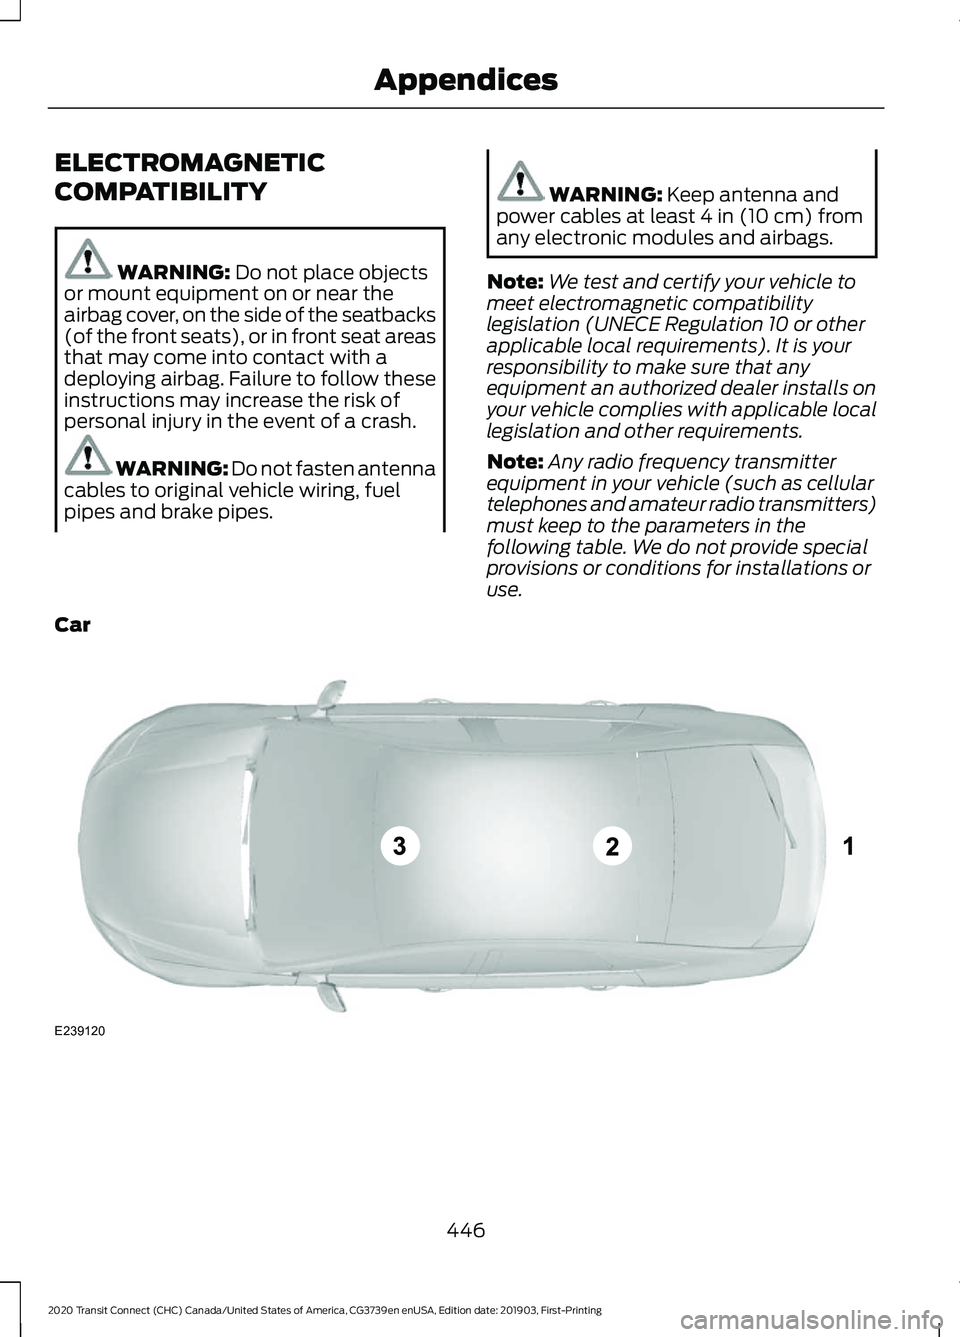 FORD TRANSIT CONNECT 2020  Owners Manual ELECTROMAGNETIC
COMPATIBILITY
WARNING: Do not place objects
or mount equipment on or near the
airbag cover, on the side of the seatbacks
(of the front seats), or in front seat areas
that may come into